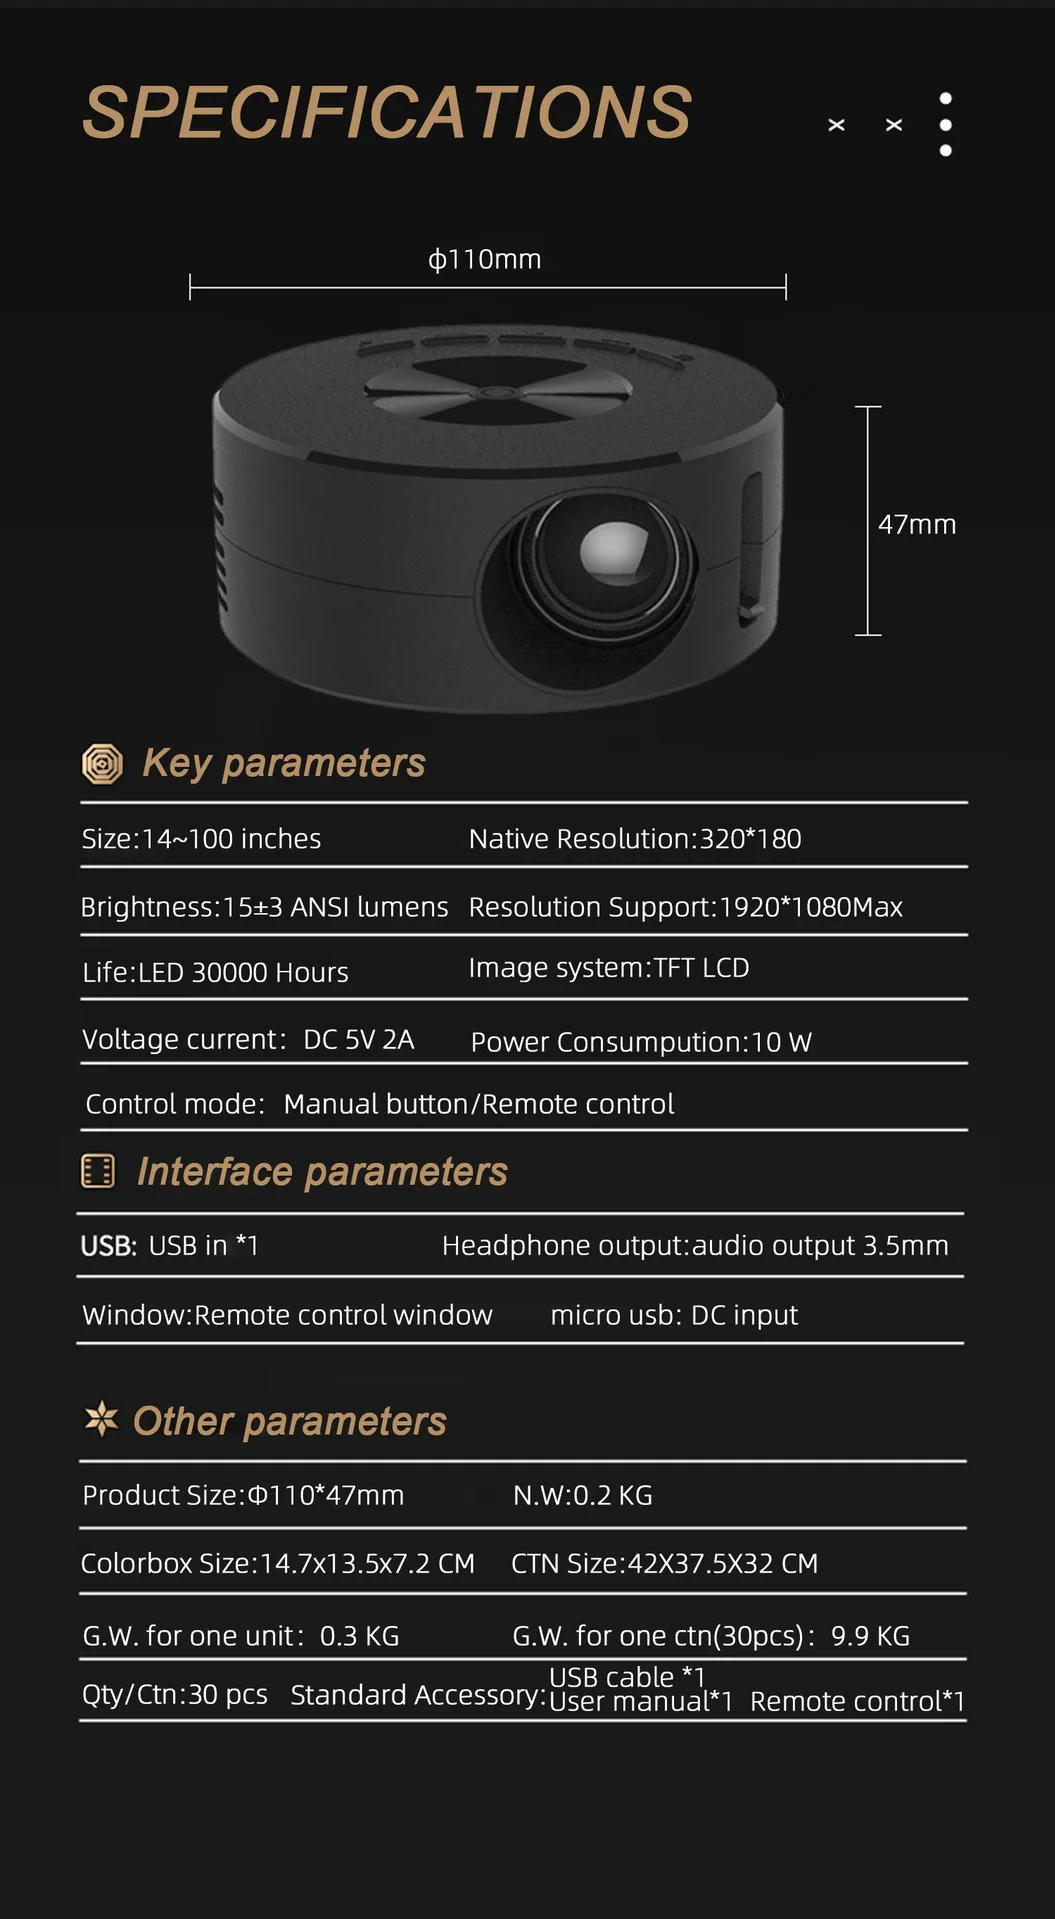 YT200 LED Palm Sized Projector With Diffuse Reflection